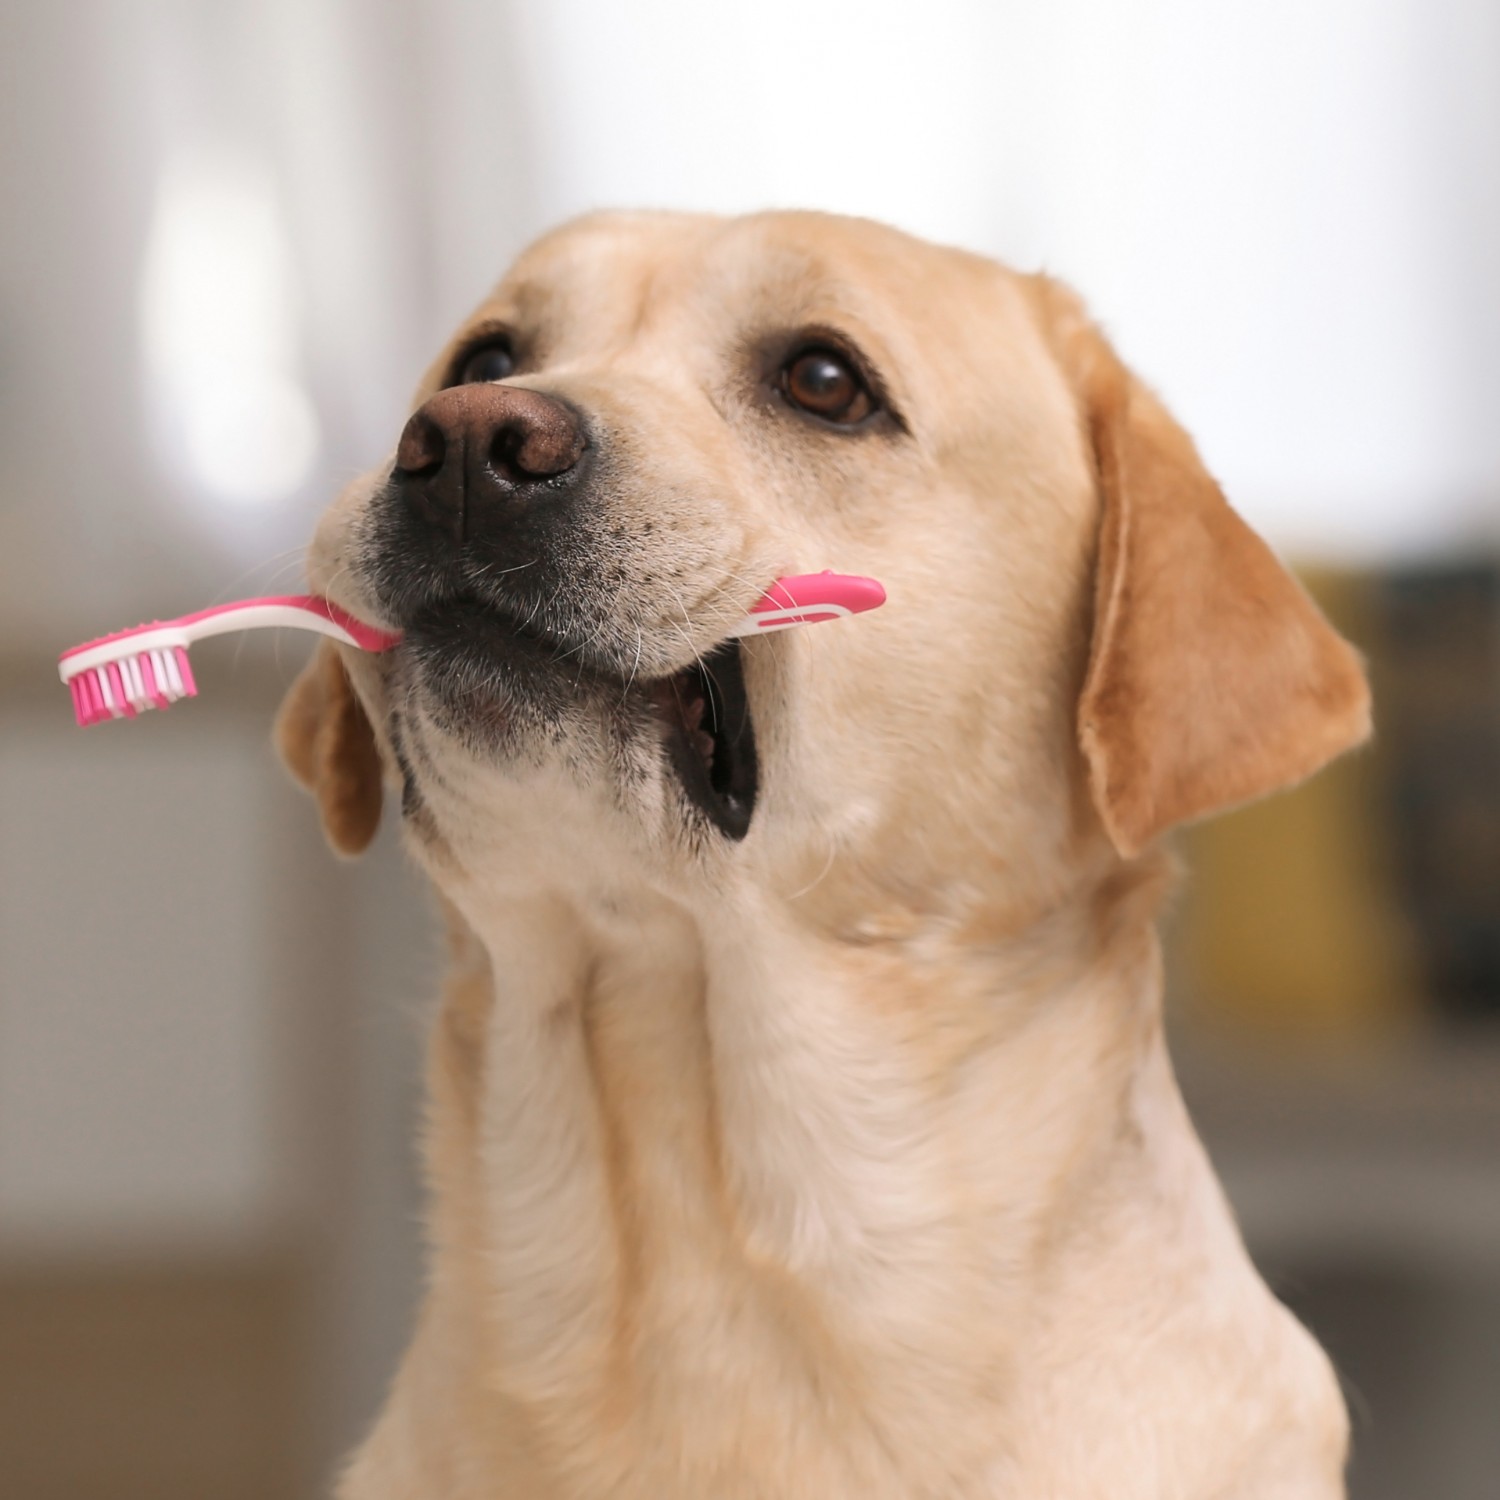 Why is dental care so important for our pets?